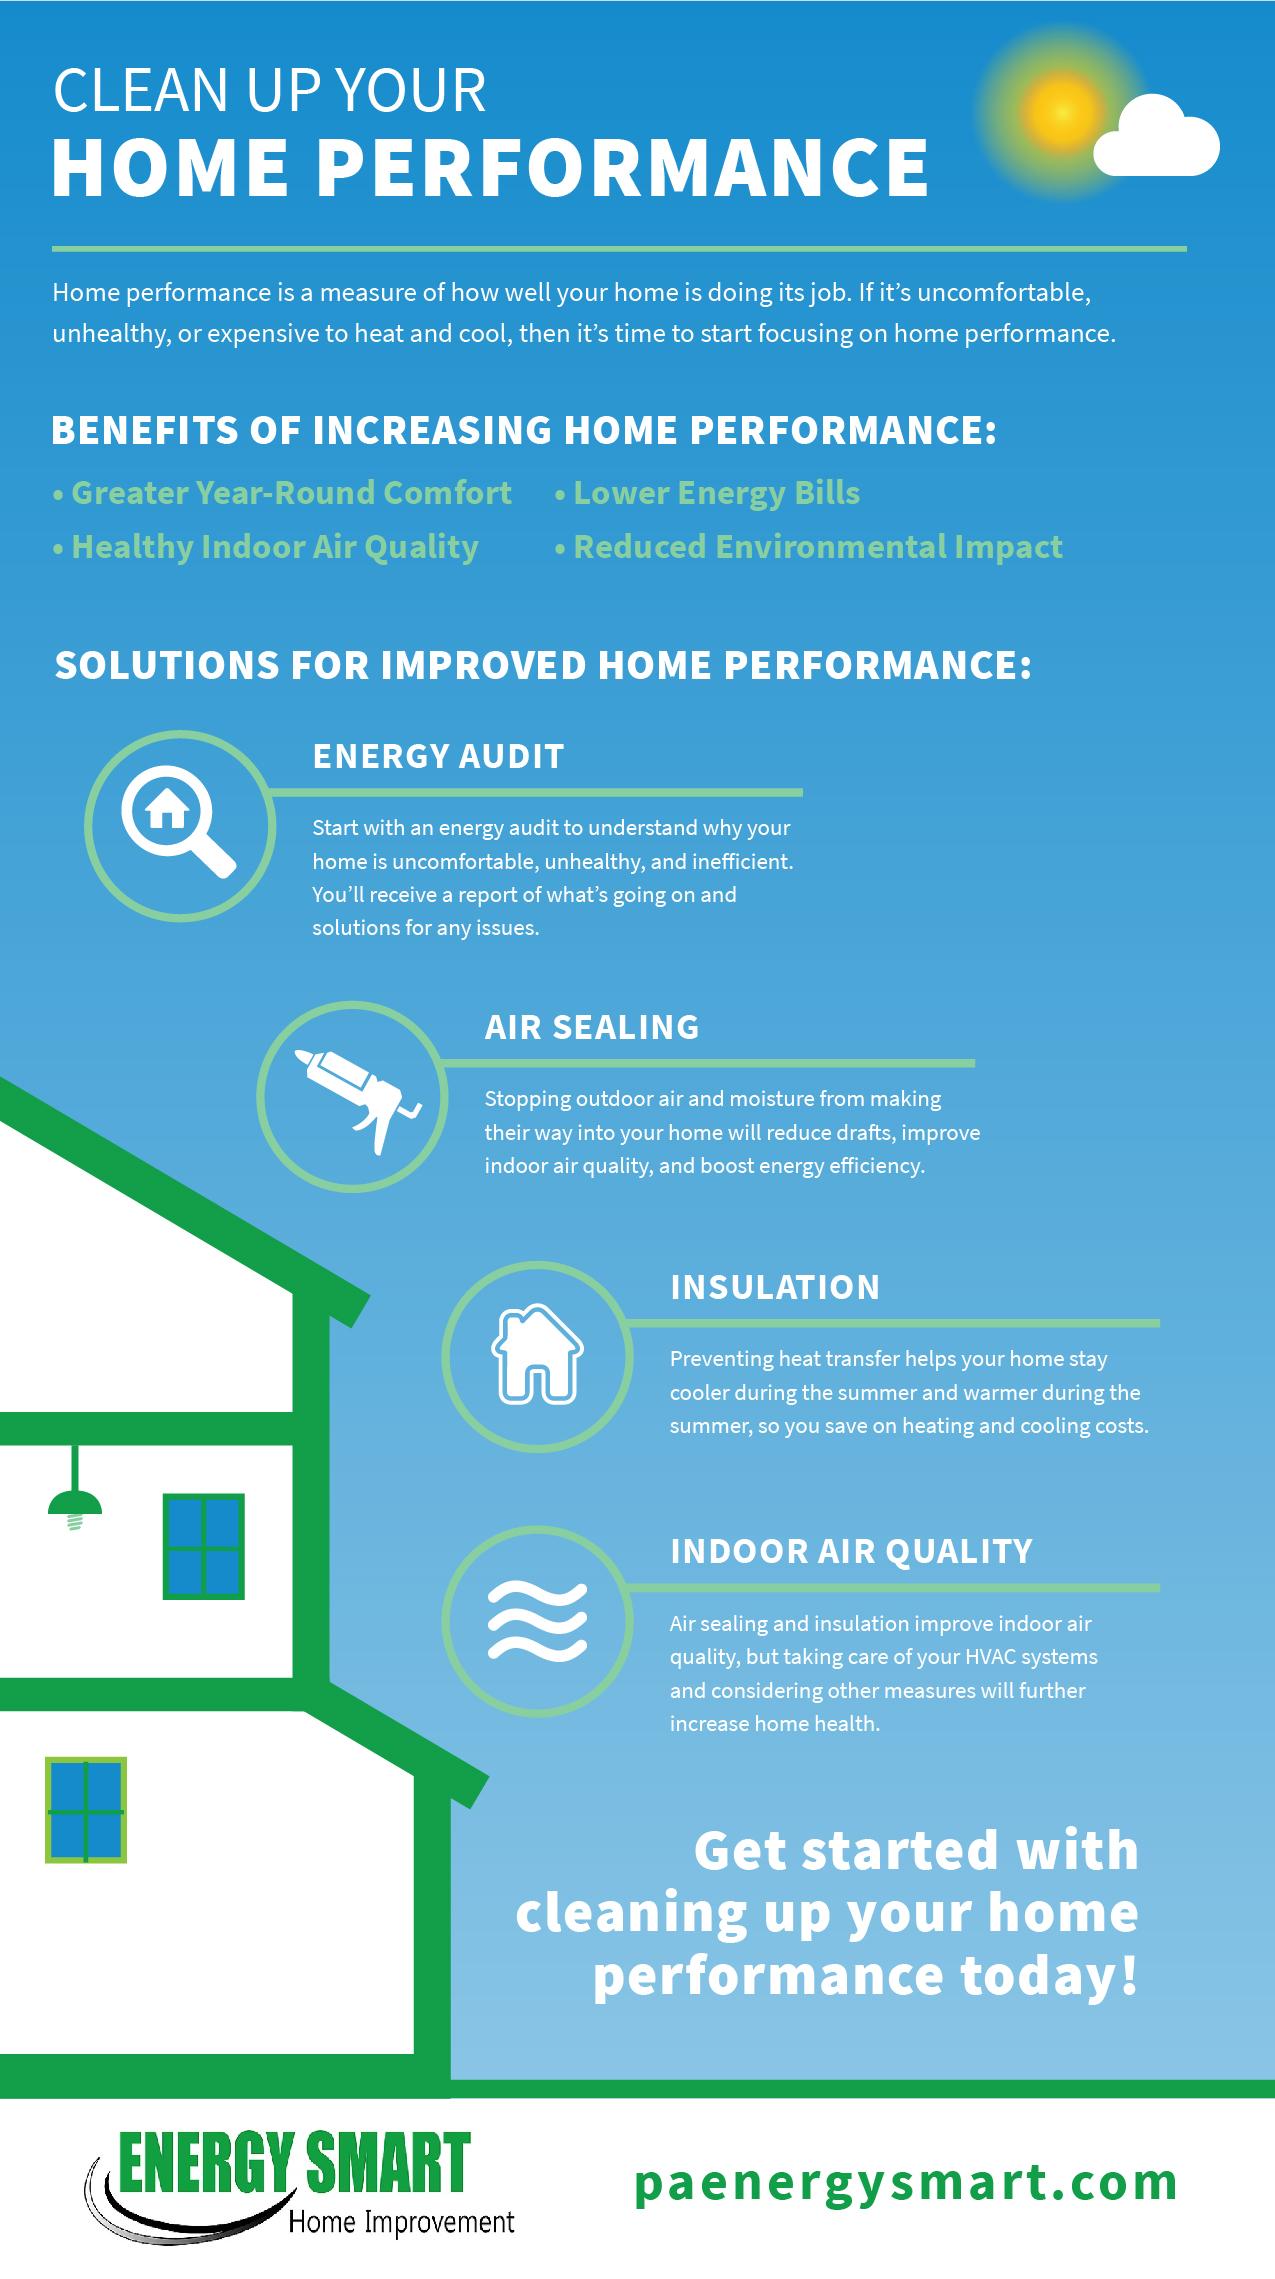 Energy Smart Home Improvement, Home Performance Insulation Air Sealing Infographic, PA